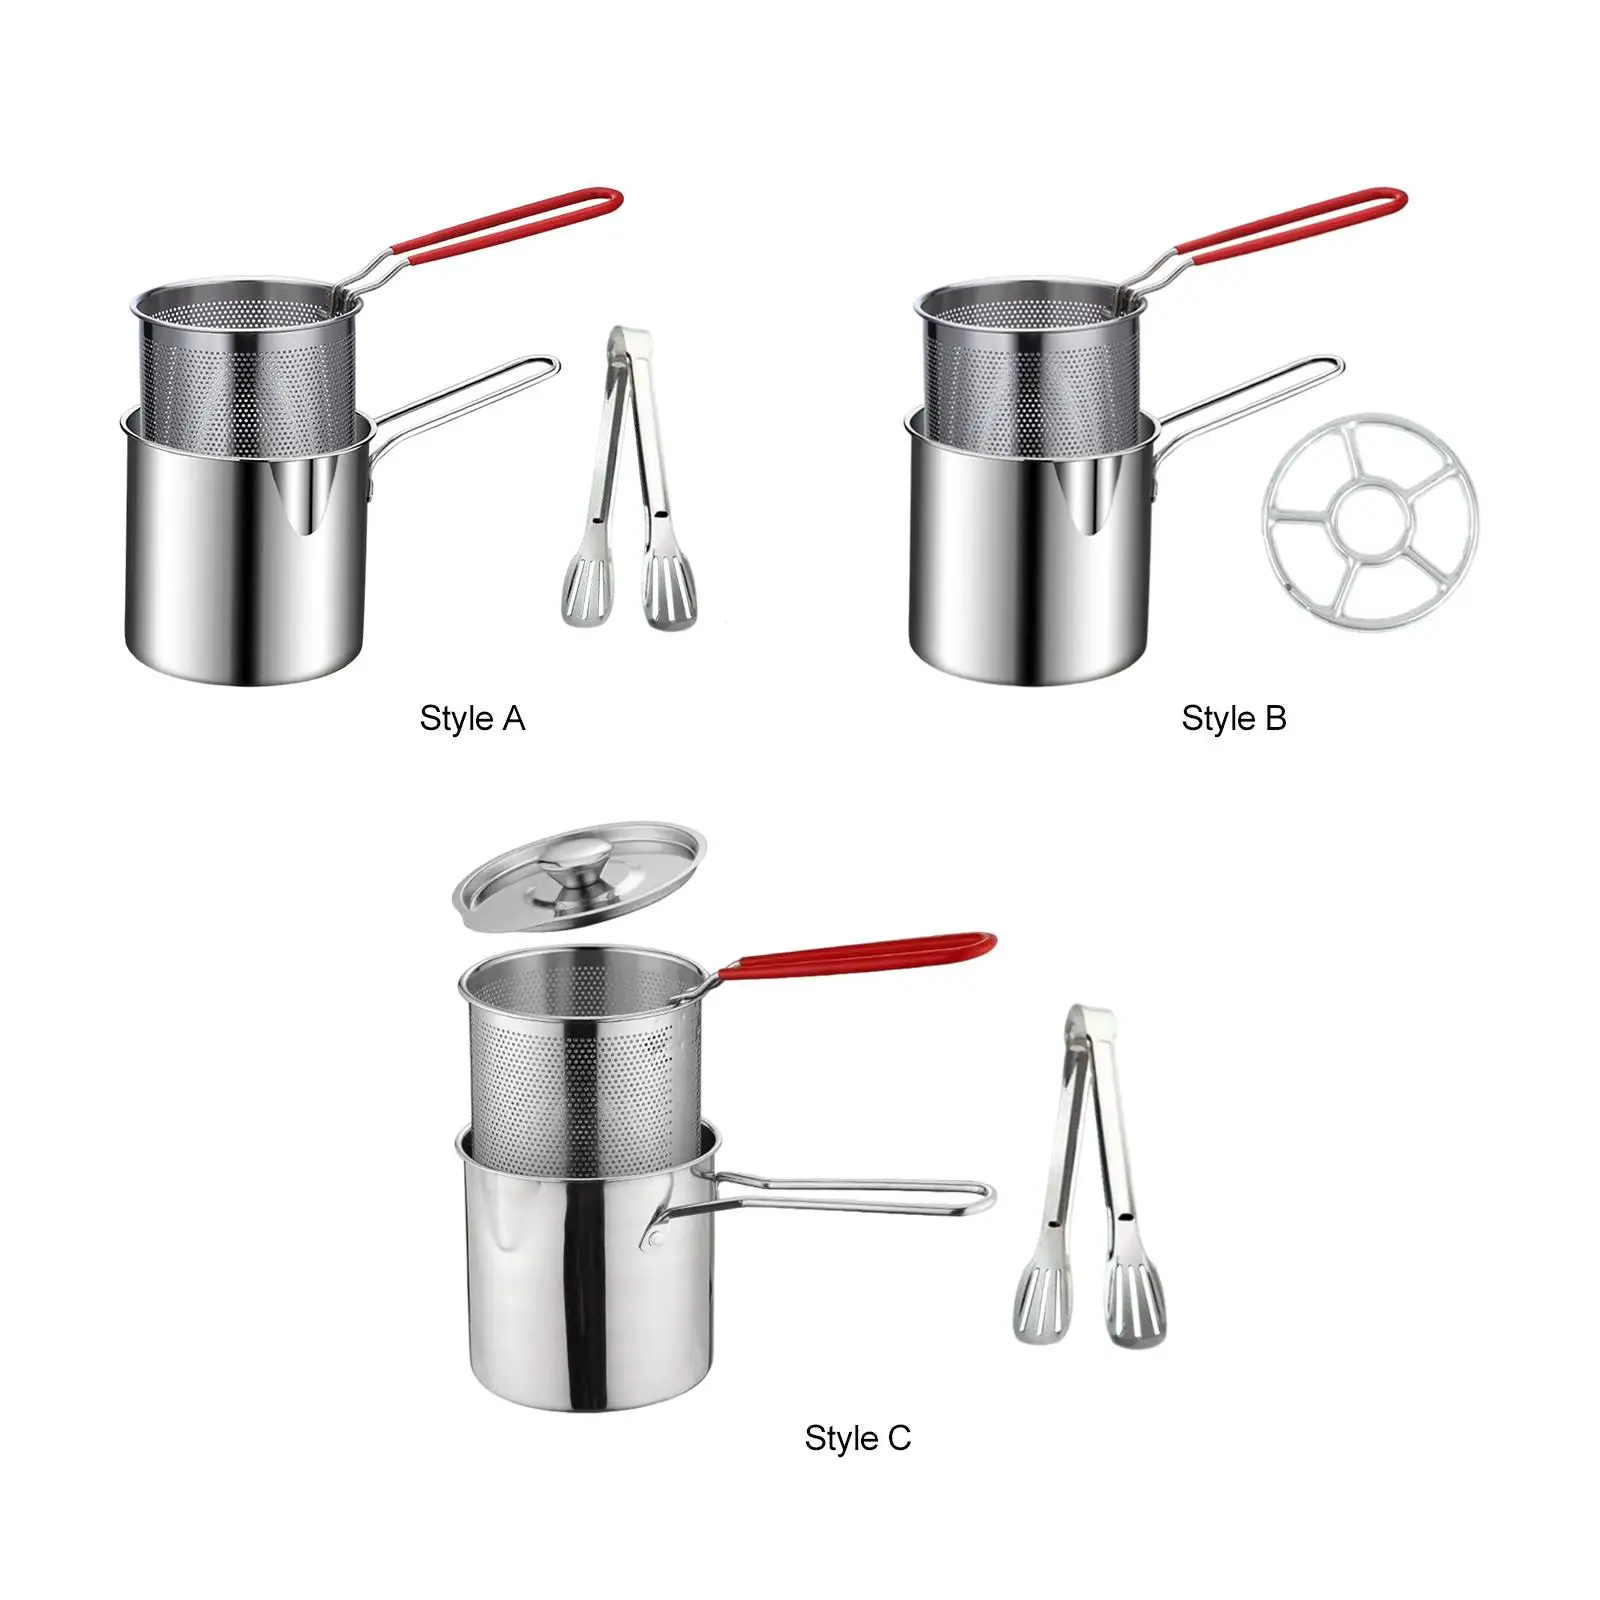 Multipurpose Deep Frying Pot Stainless Steel with Handles Milk Pot Small Pot for Kitchen Backpacking Restaurant Home Camping